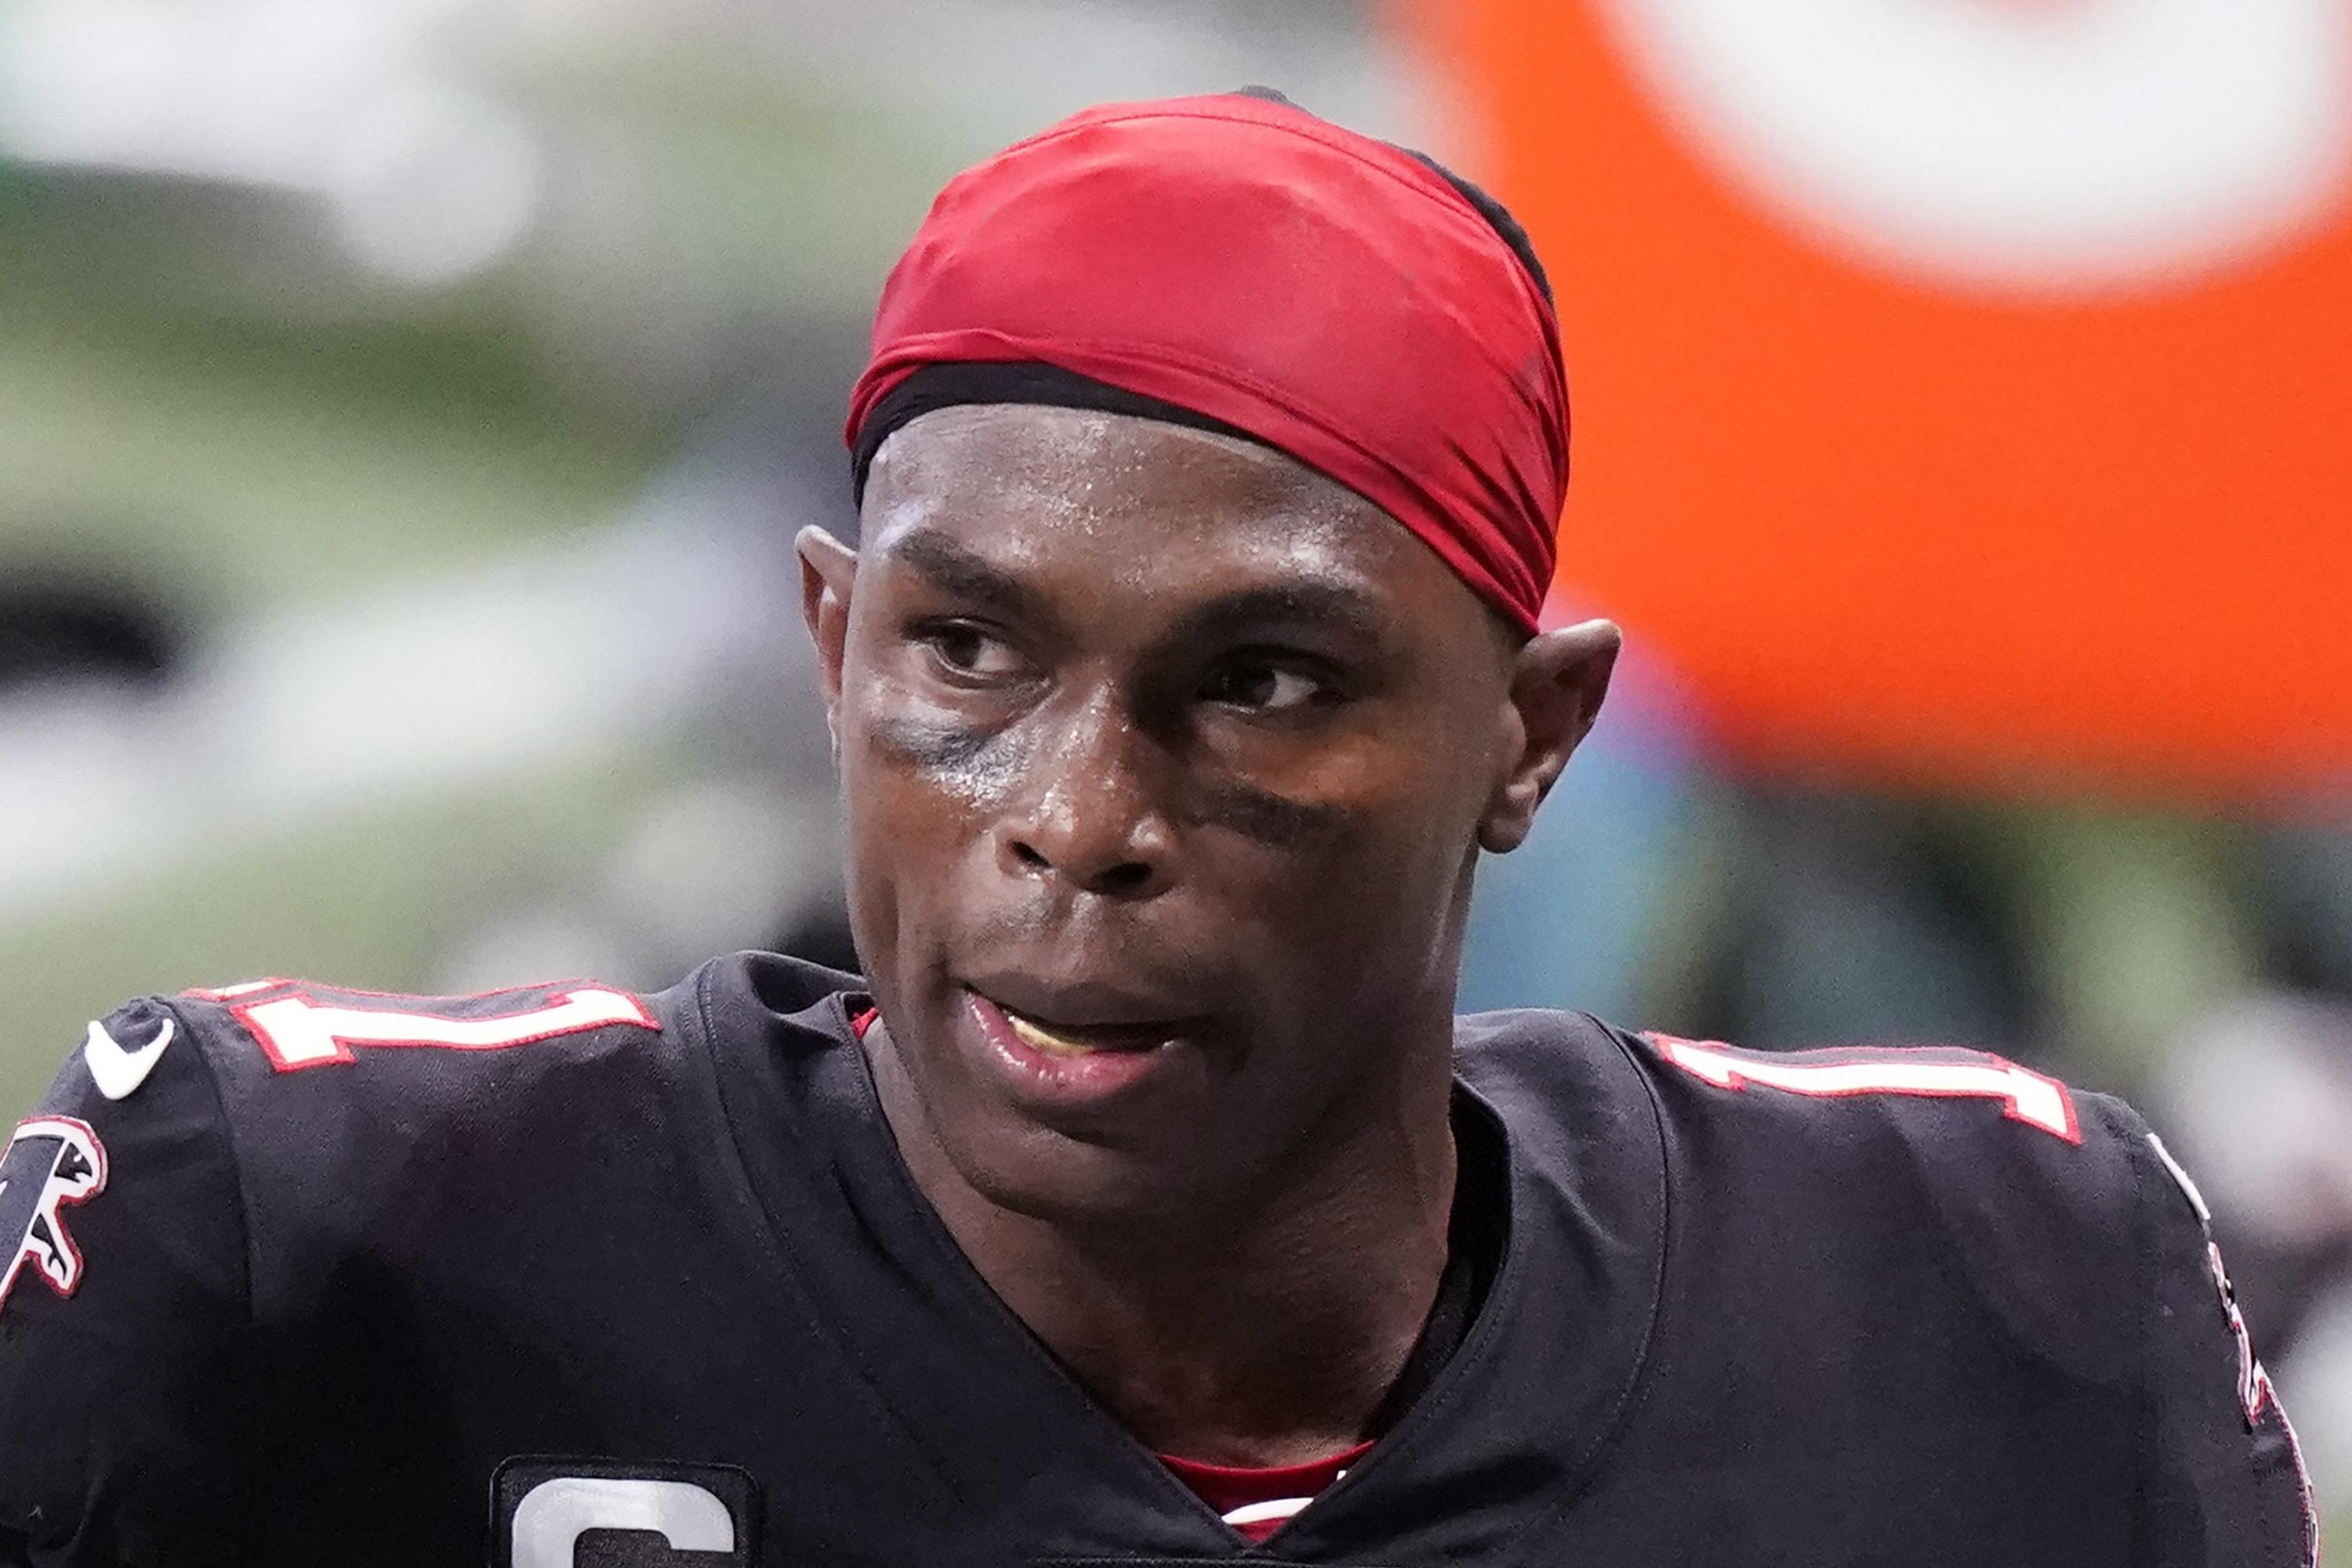 titans-agree-to-deal-with-falcons-for-julio-jones-ap-news